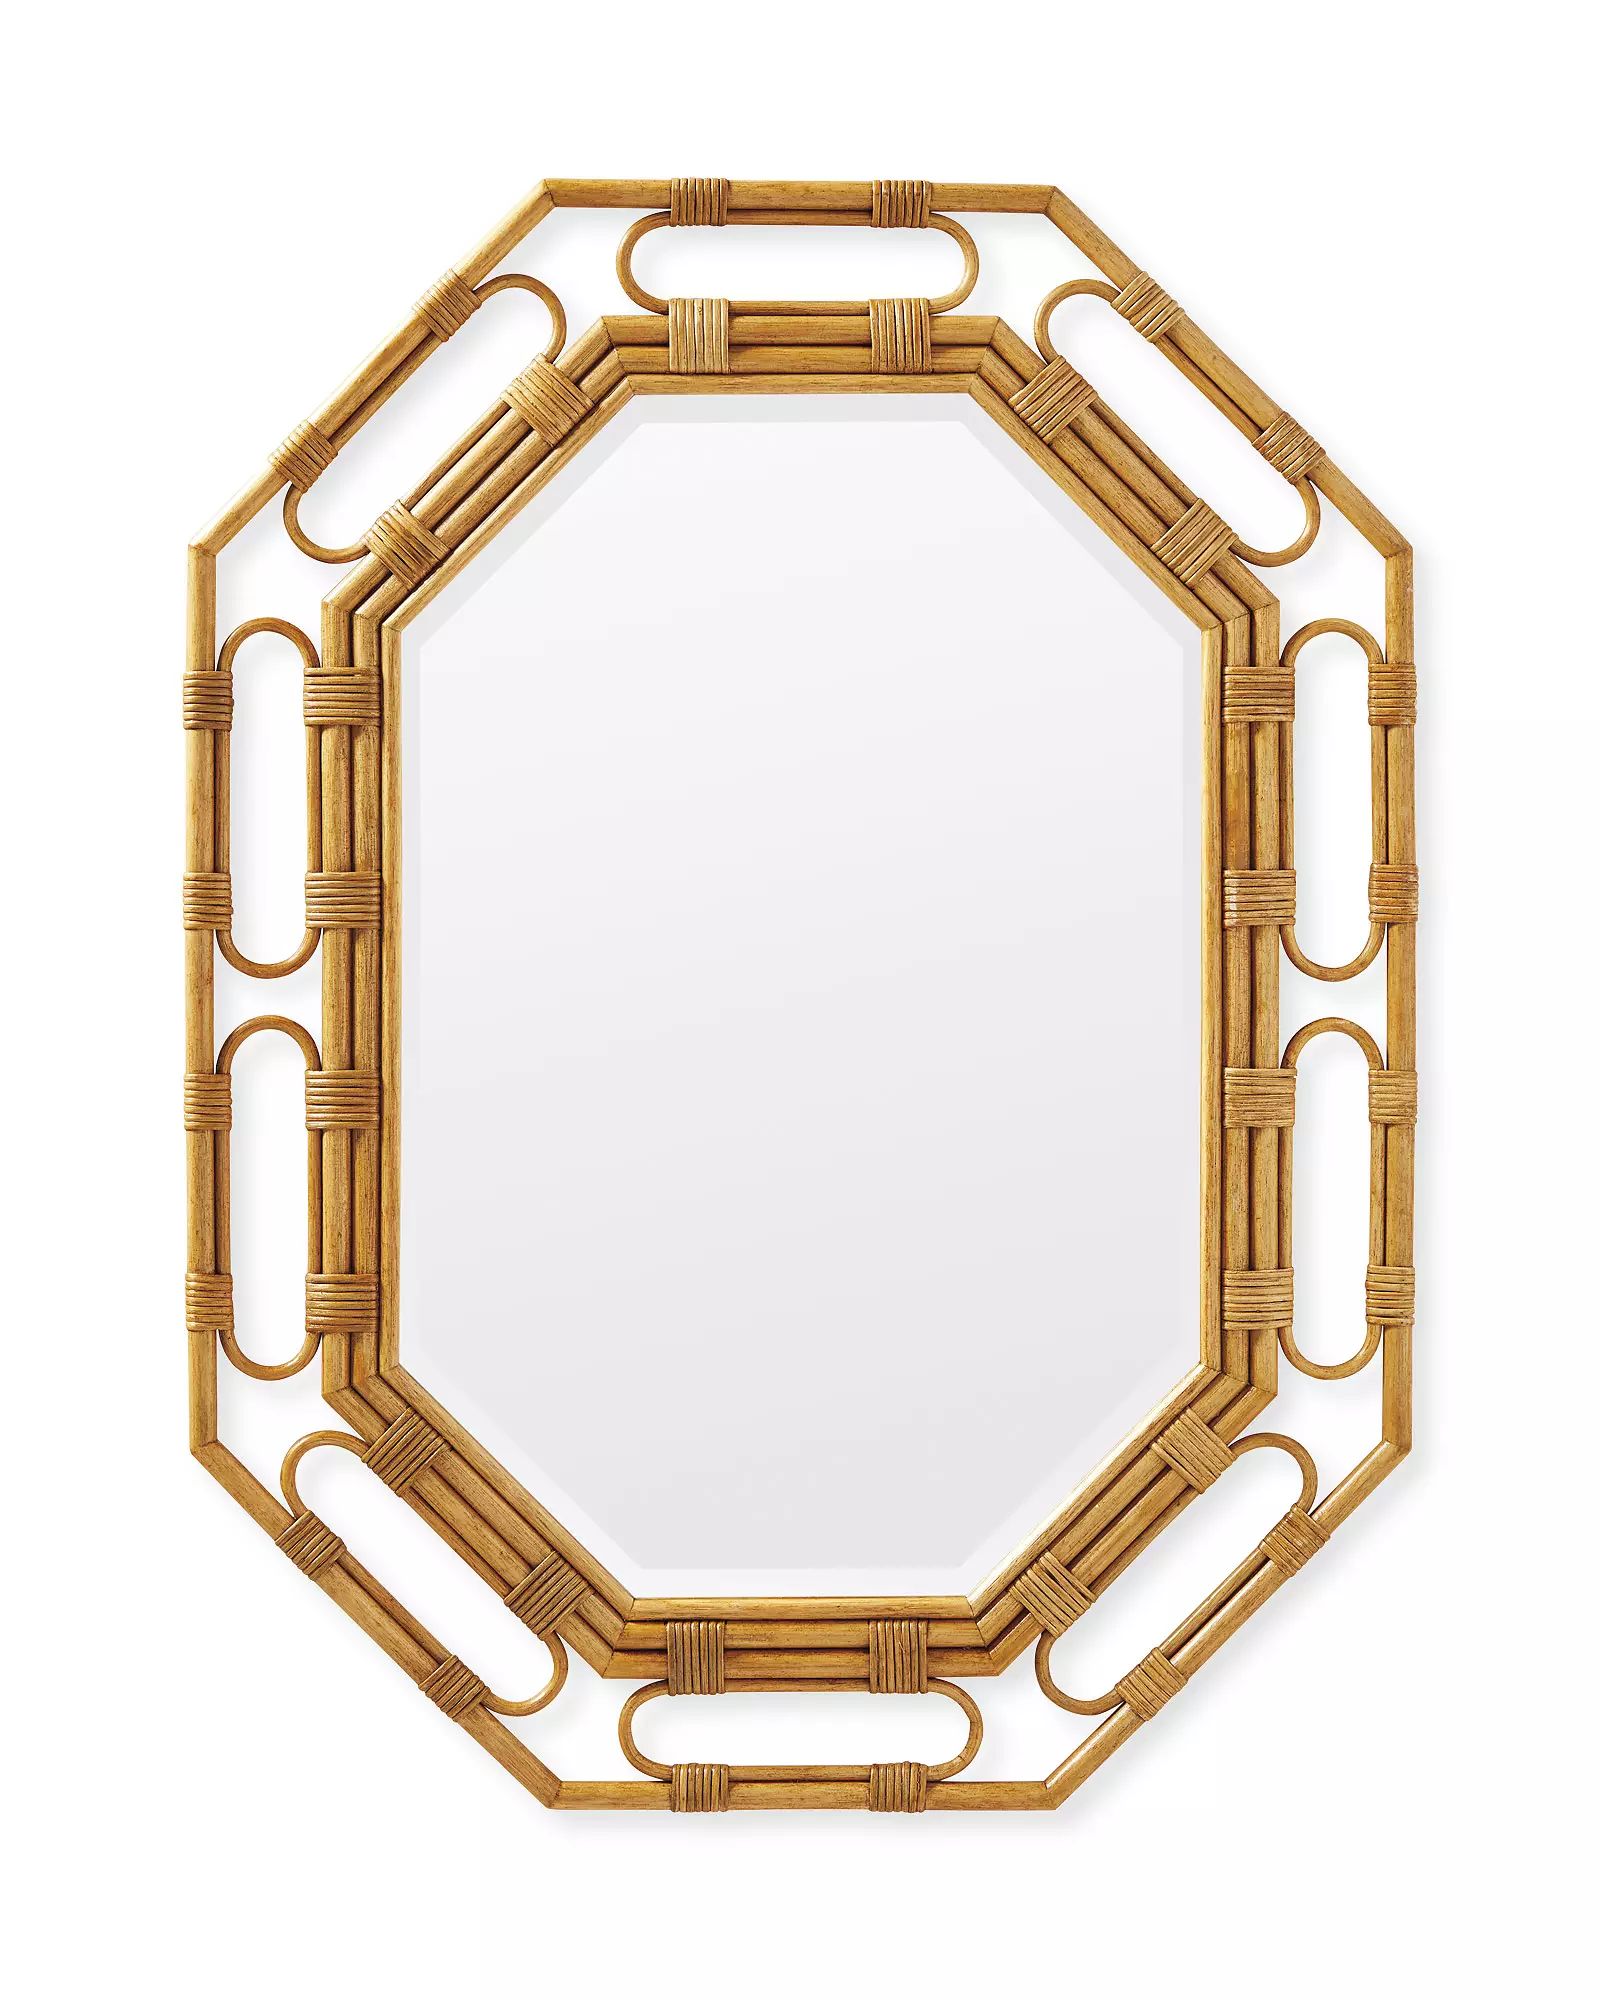 Larchmont Rattan Mirror | Serena and Lily